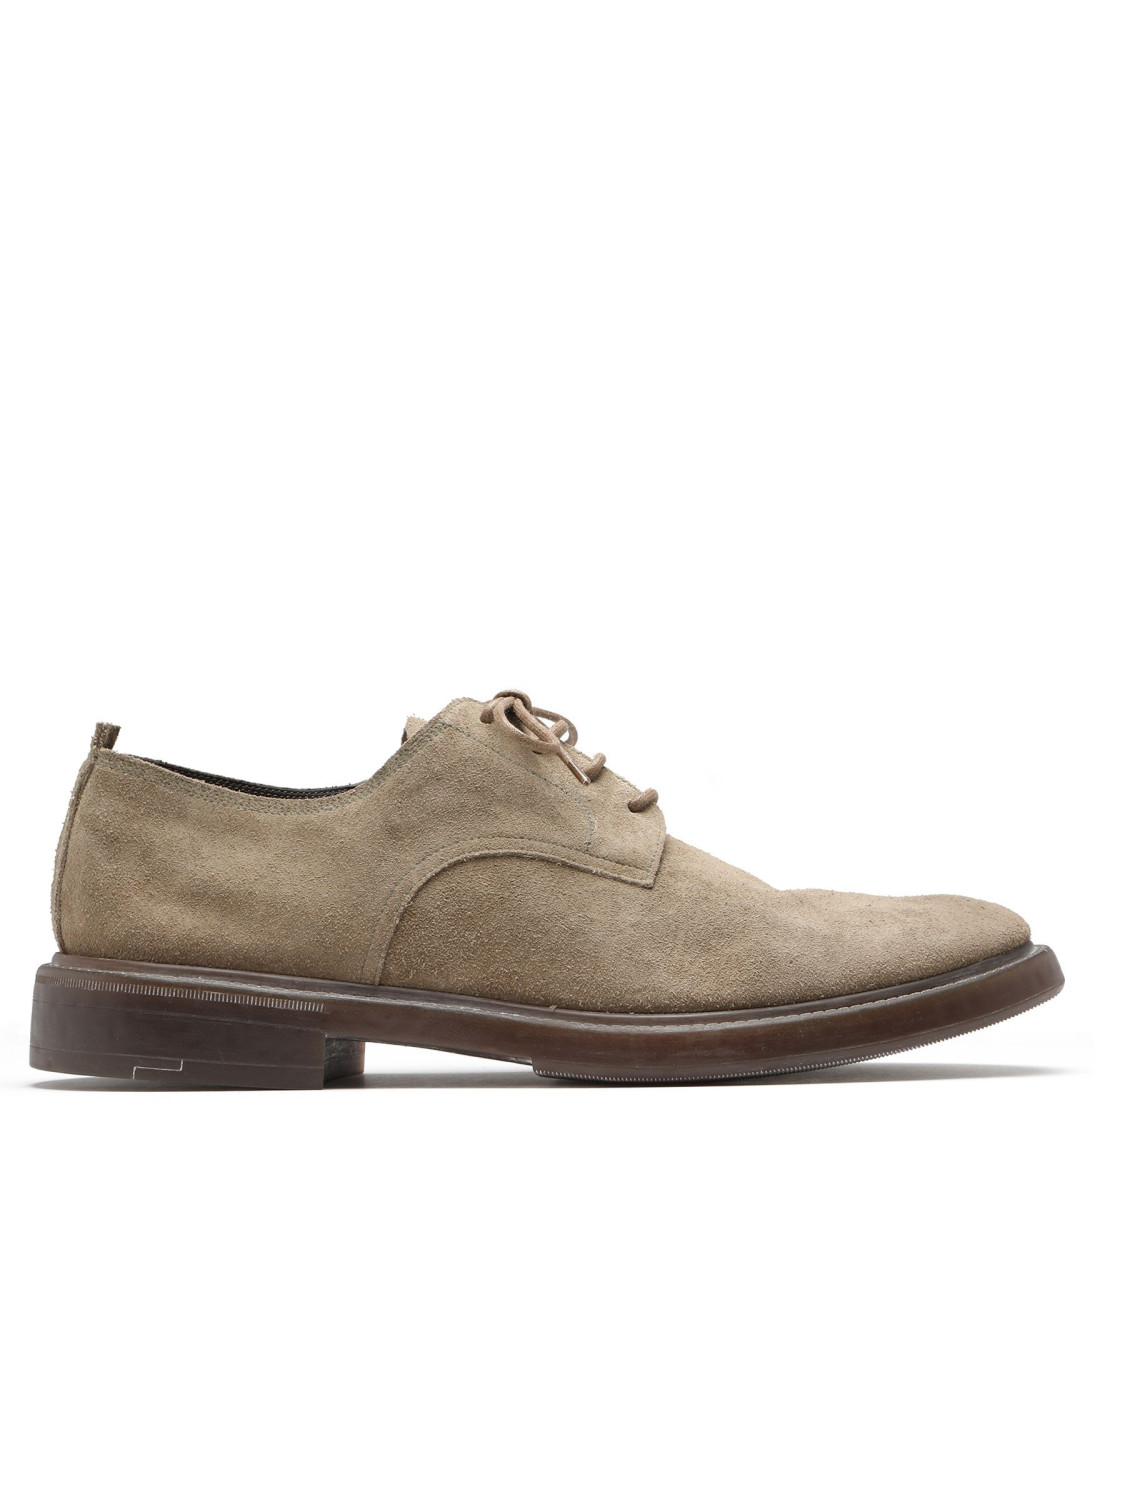 Taupe suede lace-up shoes